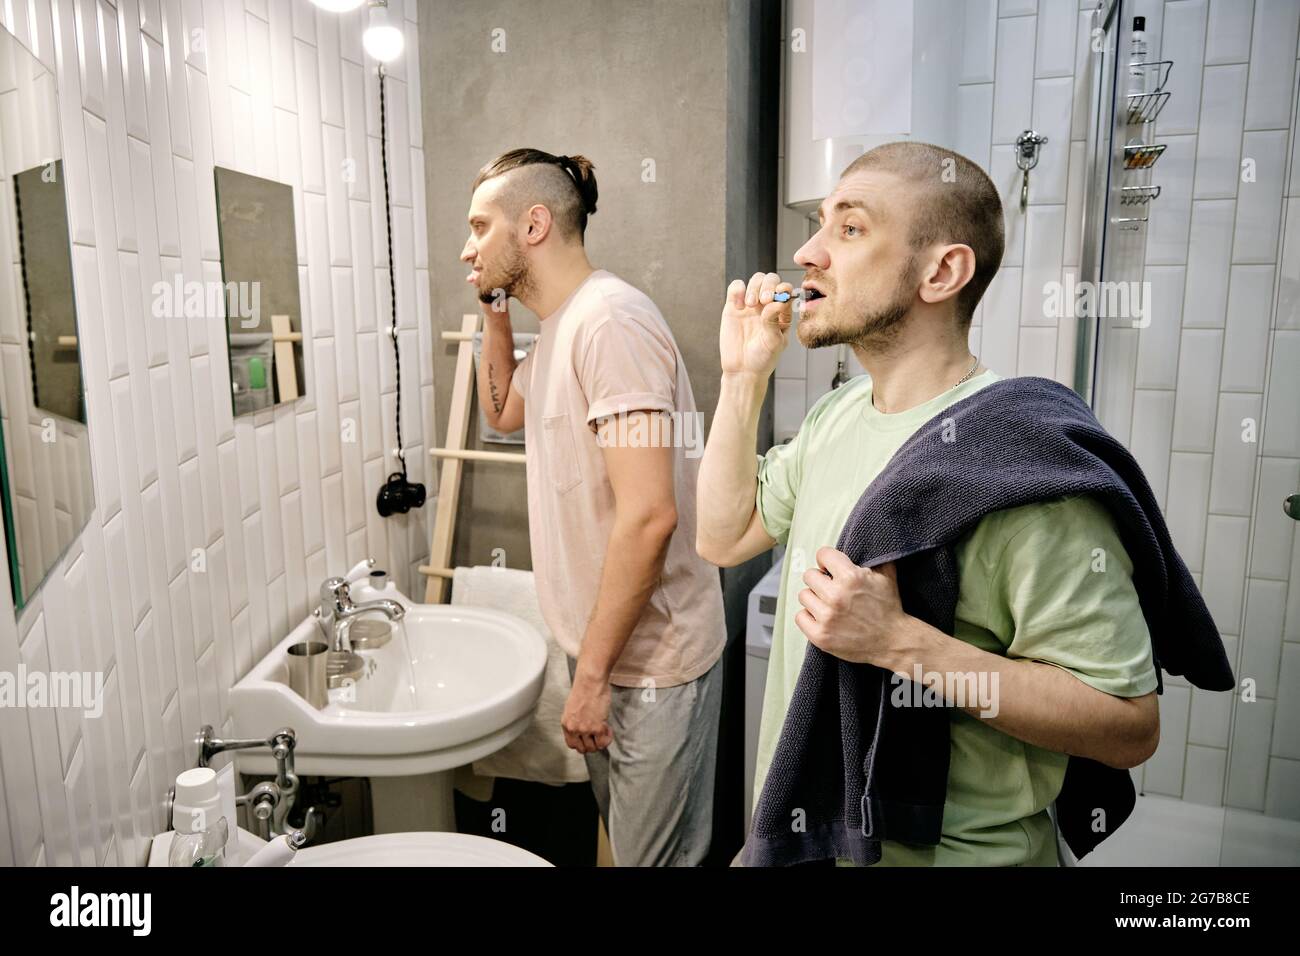 Young men brushing teeth in front of mirrors in dorm bathroom in the morning Stock Photo